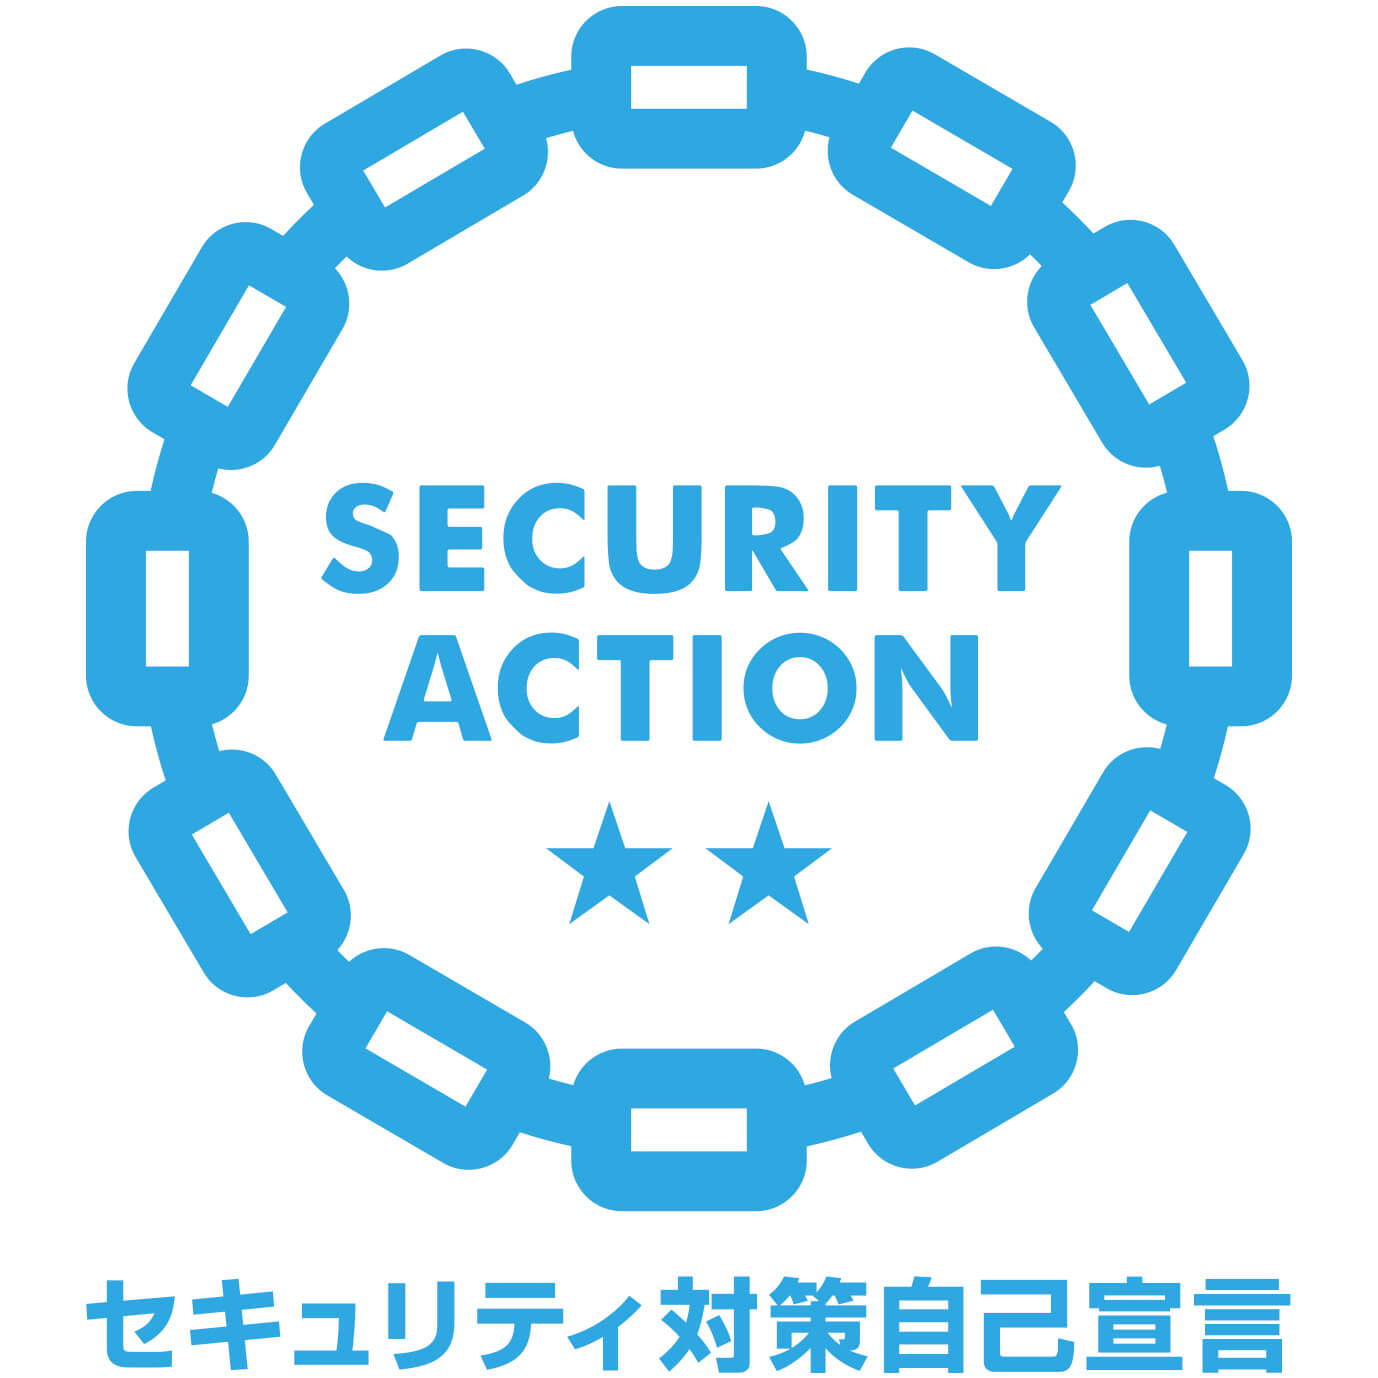 SECURITY ACTION 2 stars